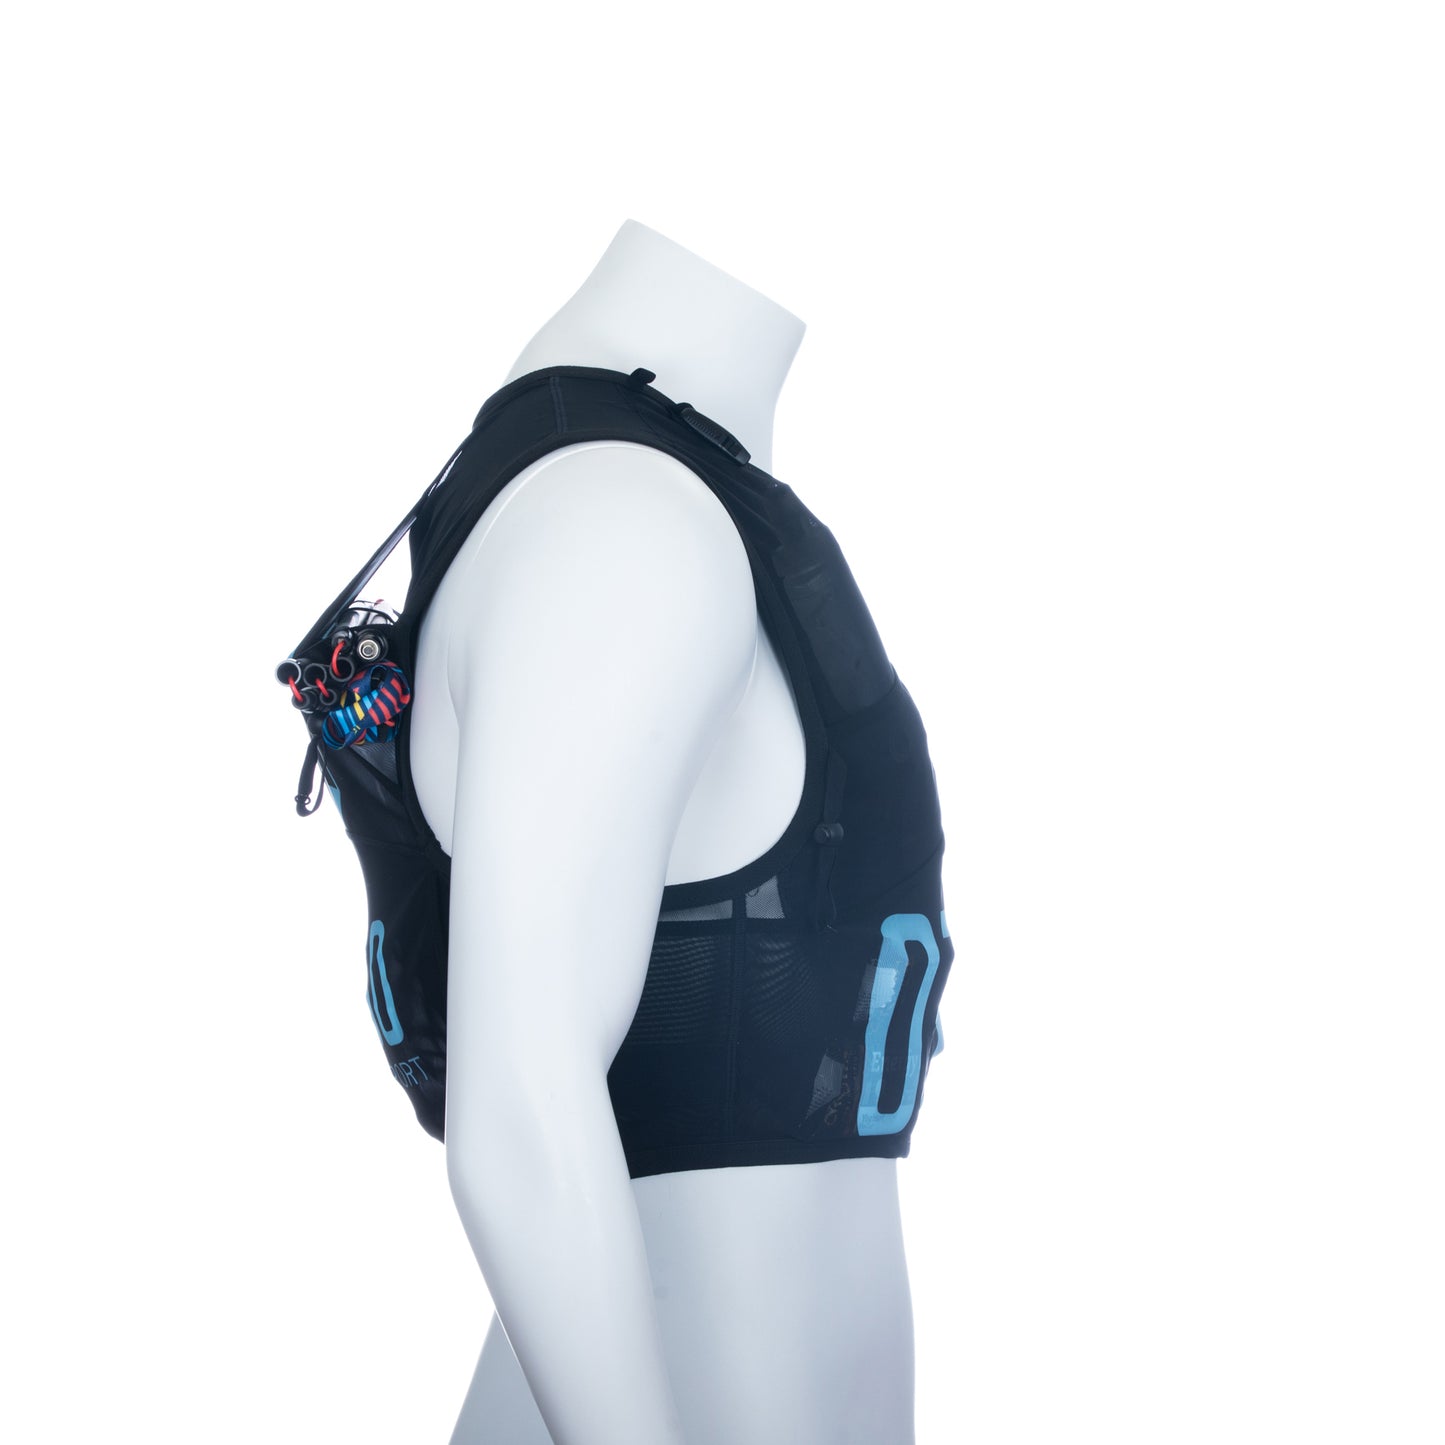 Trail Running Backpack Black & Turquoise